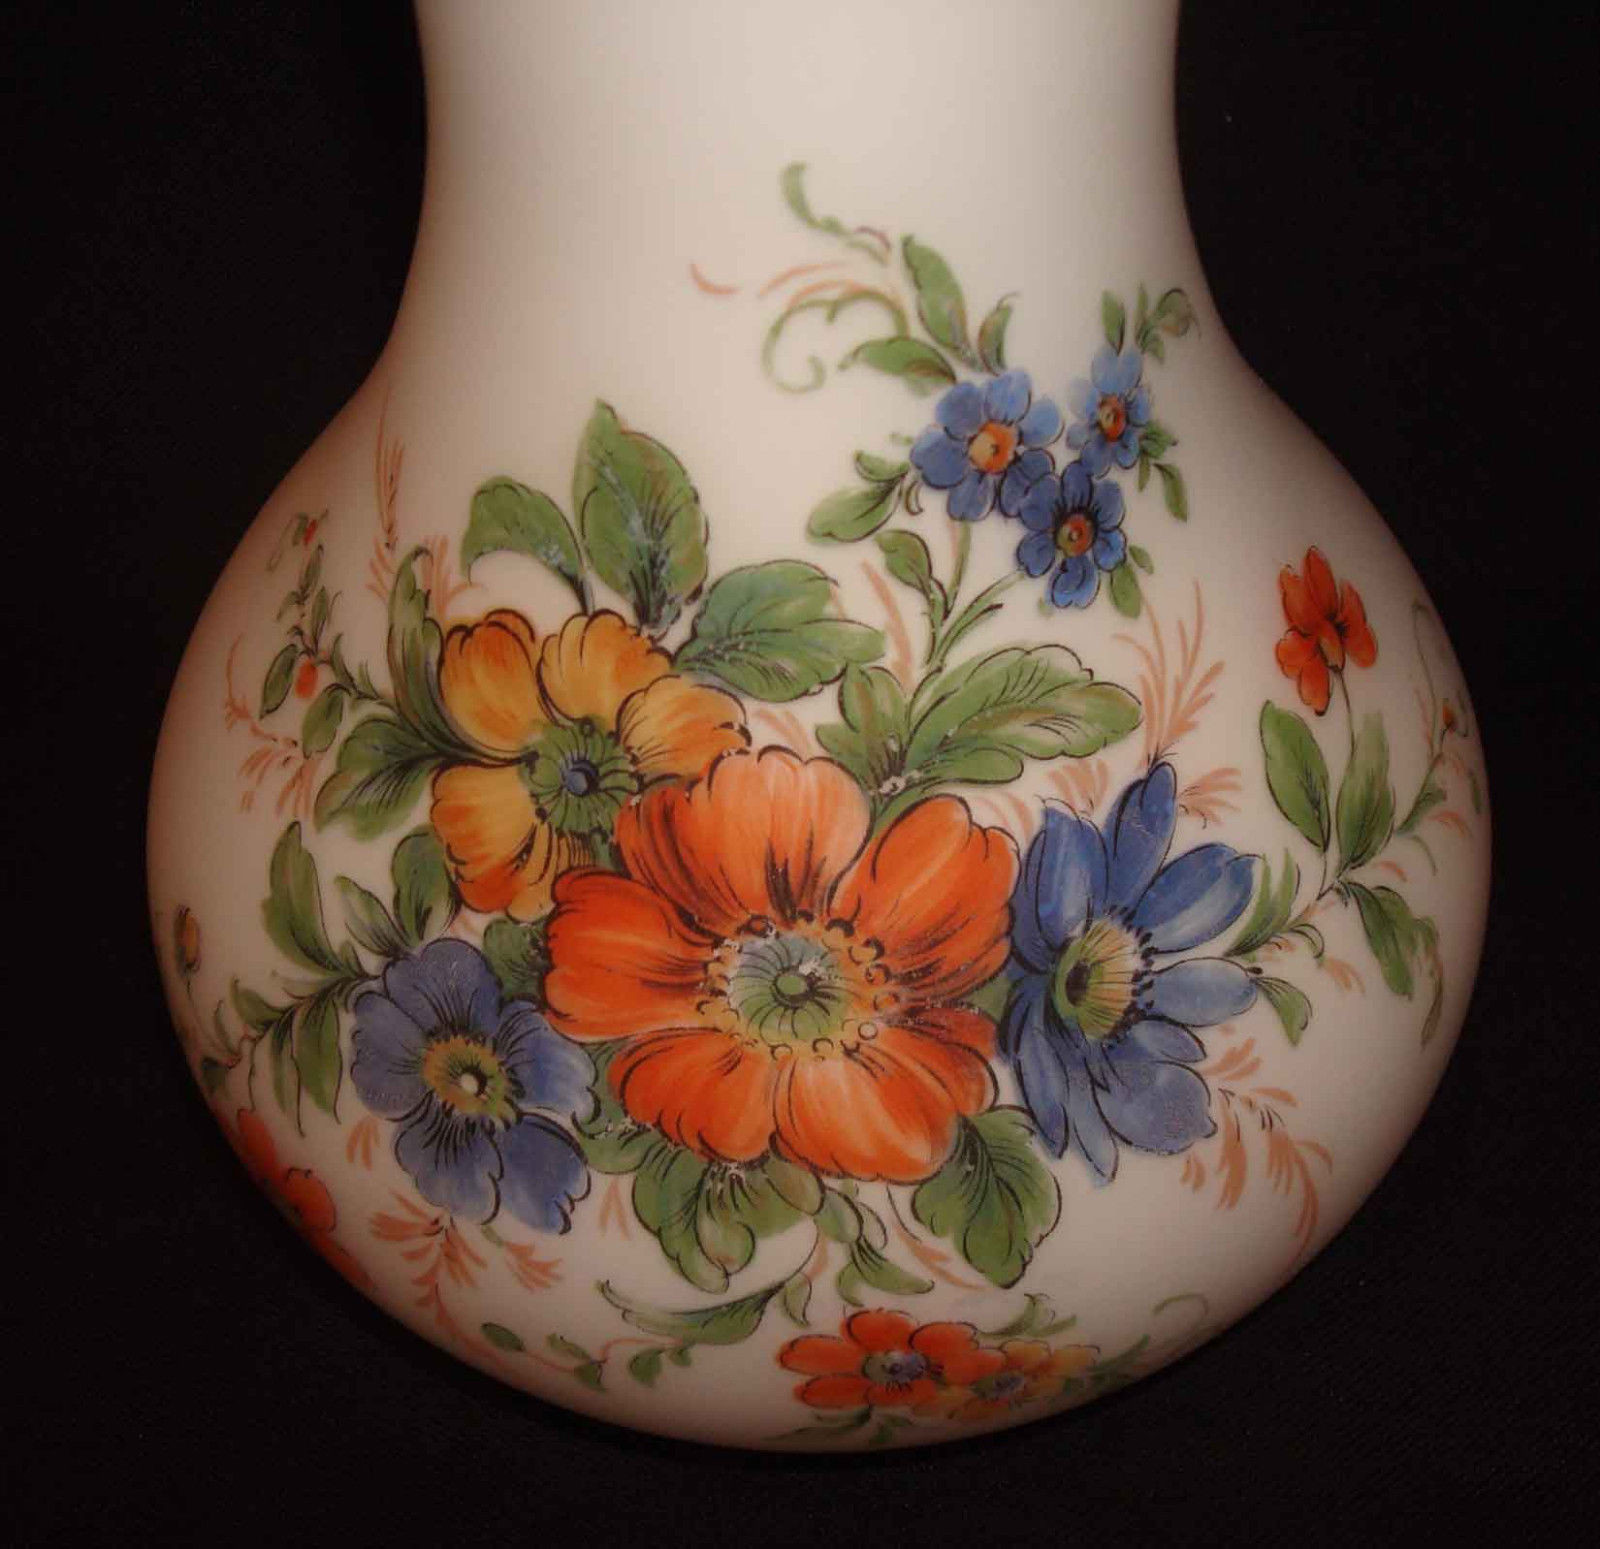 norleans vase made in italy of vintage norleans hand made italian italy art glass flower bouquet inside 1 of 4 vintage norleans hand made italian italy art glass flower bouquet satin 10 vase 2 of 4 vintage norleans hand made italian